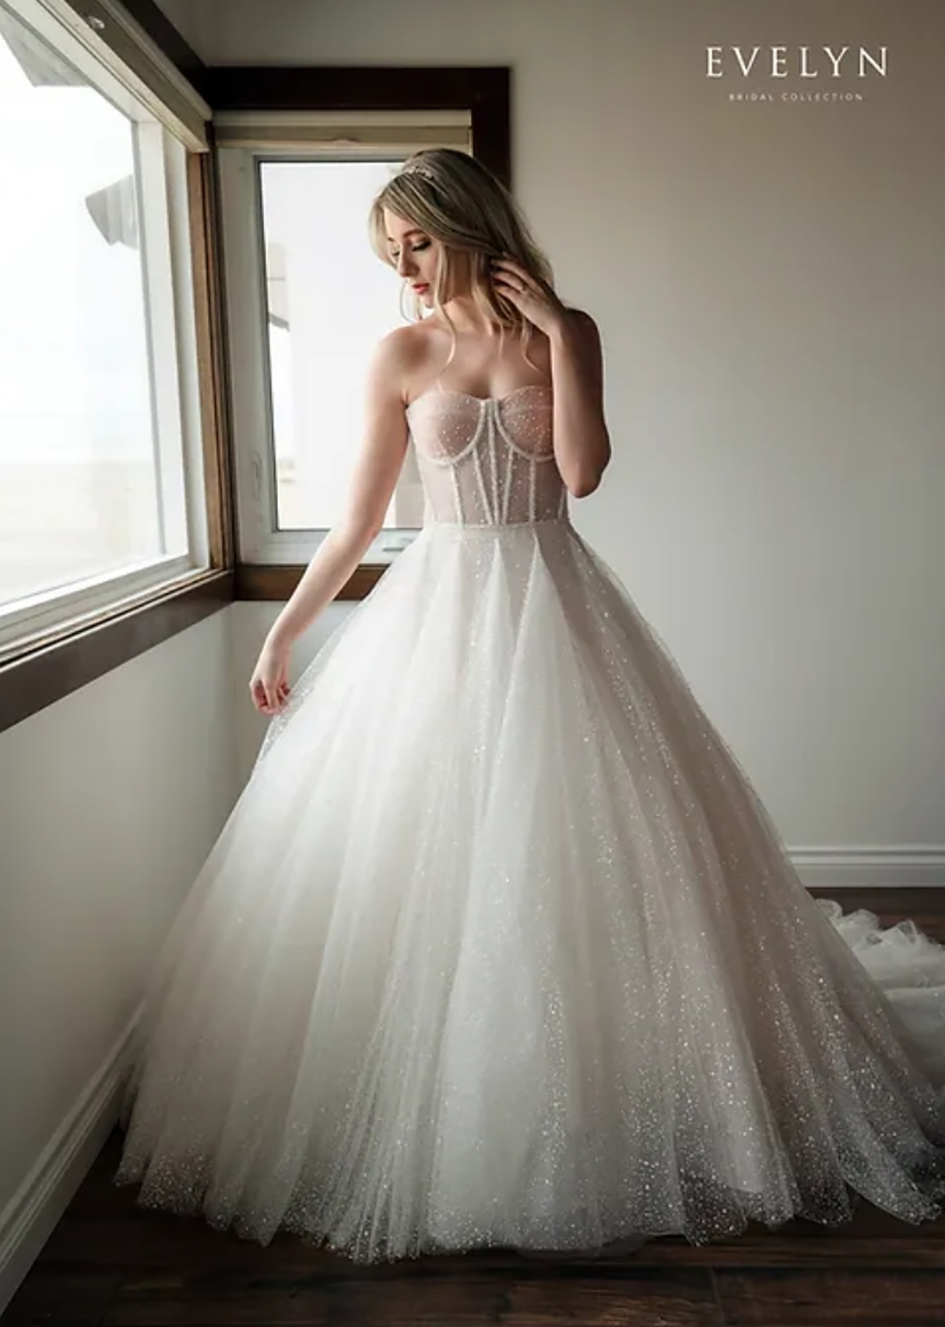 Evelyn Bridal Collection